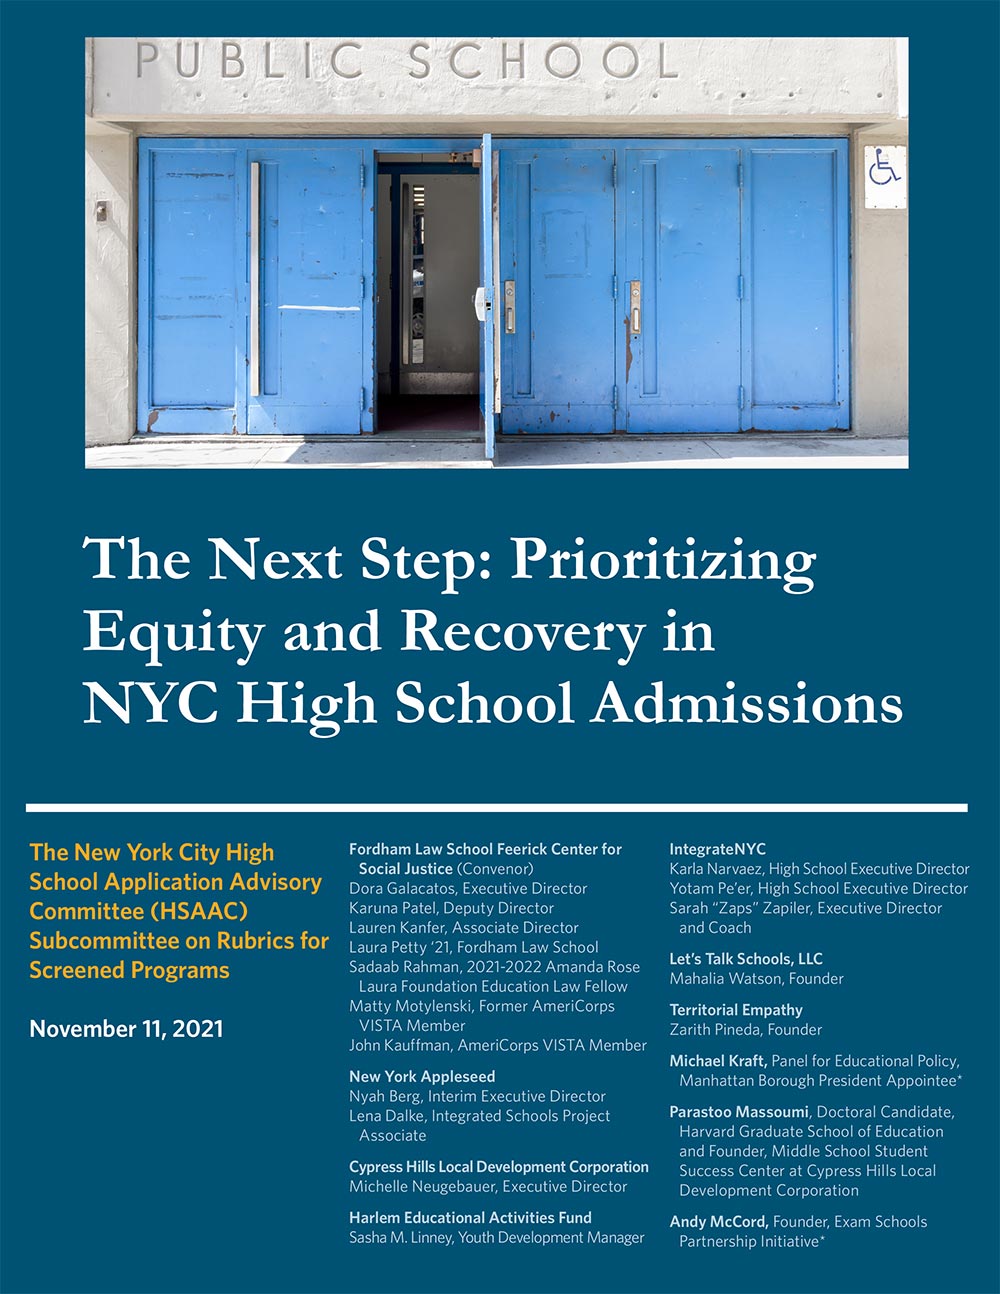 The Next Step: Prioritizing Equity and Recovery in NYC High School Admissions Cover